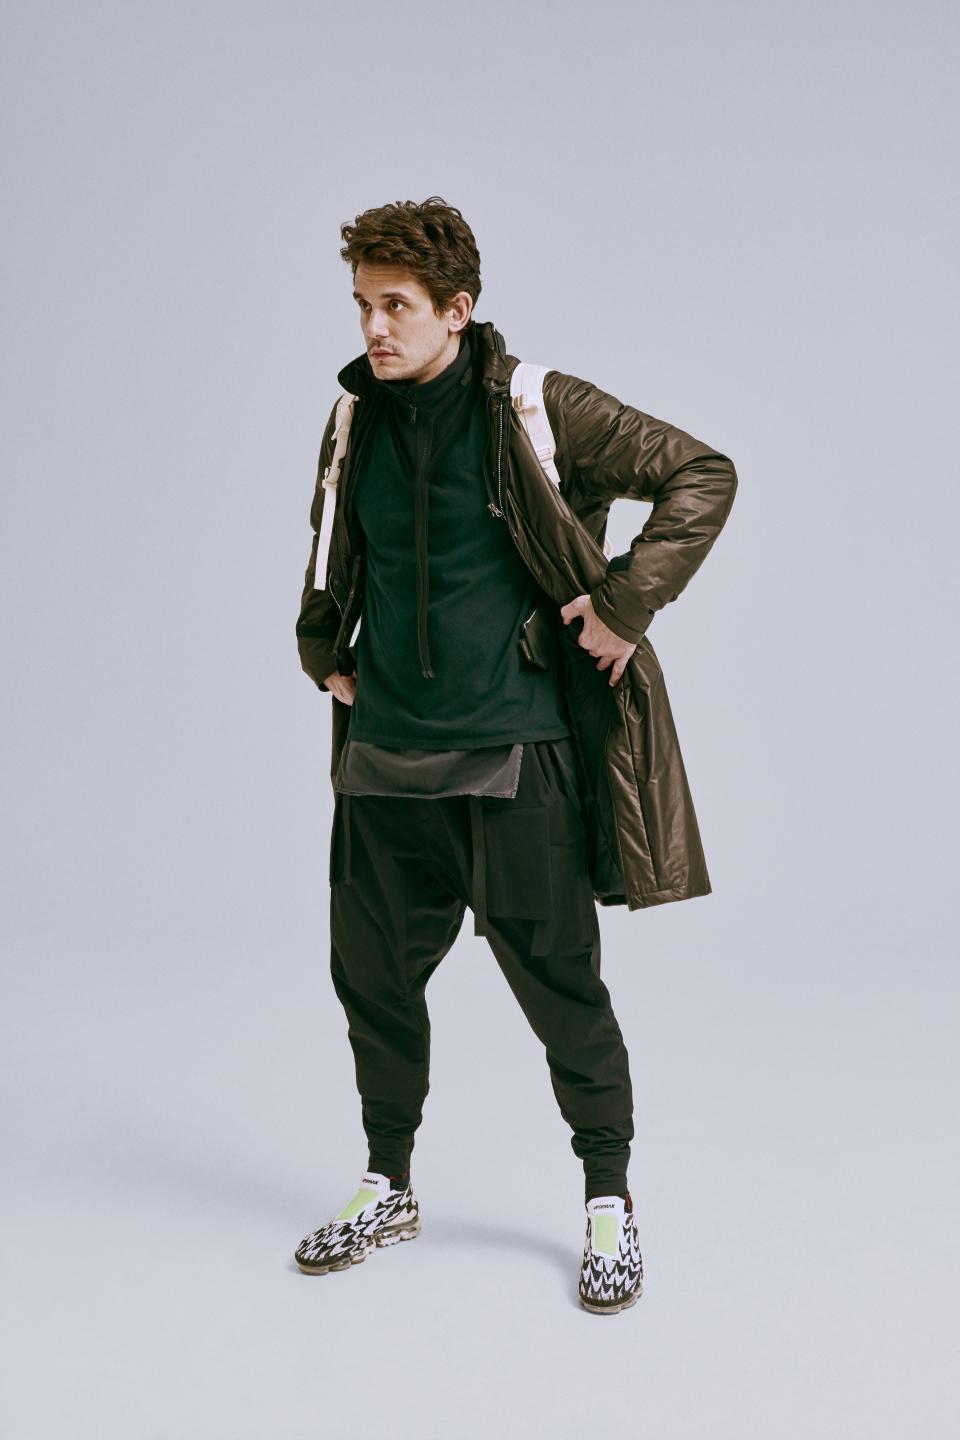 <cite class="credit">J46-FO 2L coat (2018), 3A-SR1 Third Arm Suspensor Harness, S8-C Object Dyed tank top (S/S '15), NG9-PS Modular zippered neck gaiter, and P23A-DS cargo drawcord trouser (F/W '17/'18), by Acronym / Jumbo tee, and Cordura 20L backpack (2018), by Visvim / Air Vapormax Moc 2 x Acronym sneakers, by Nike x Acronym</cite>